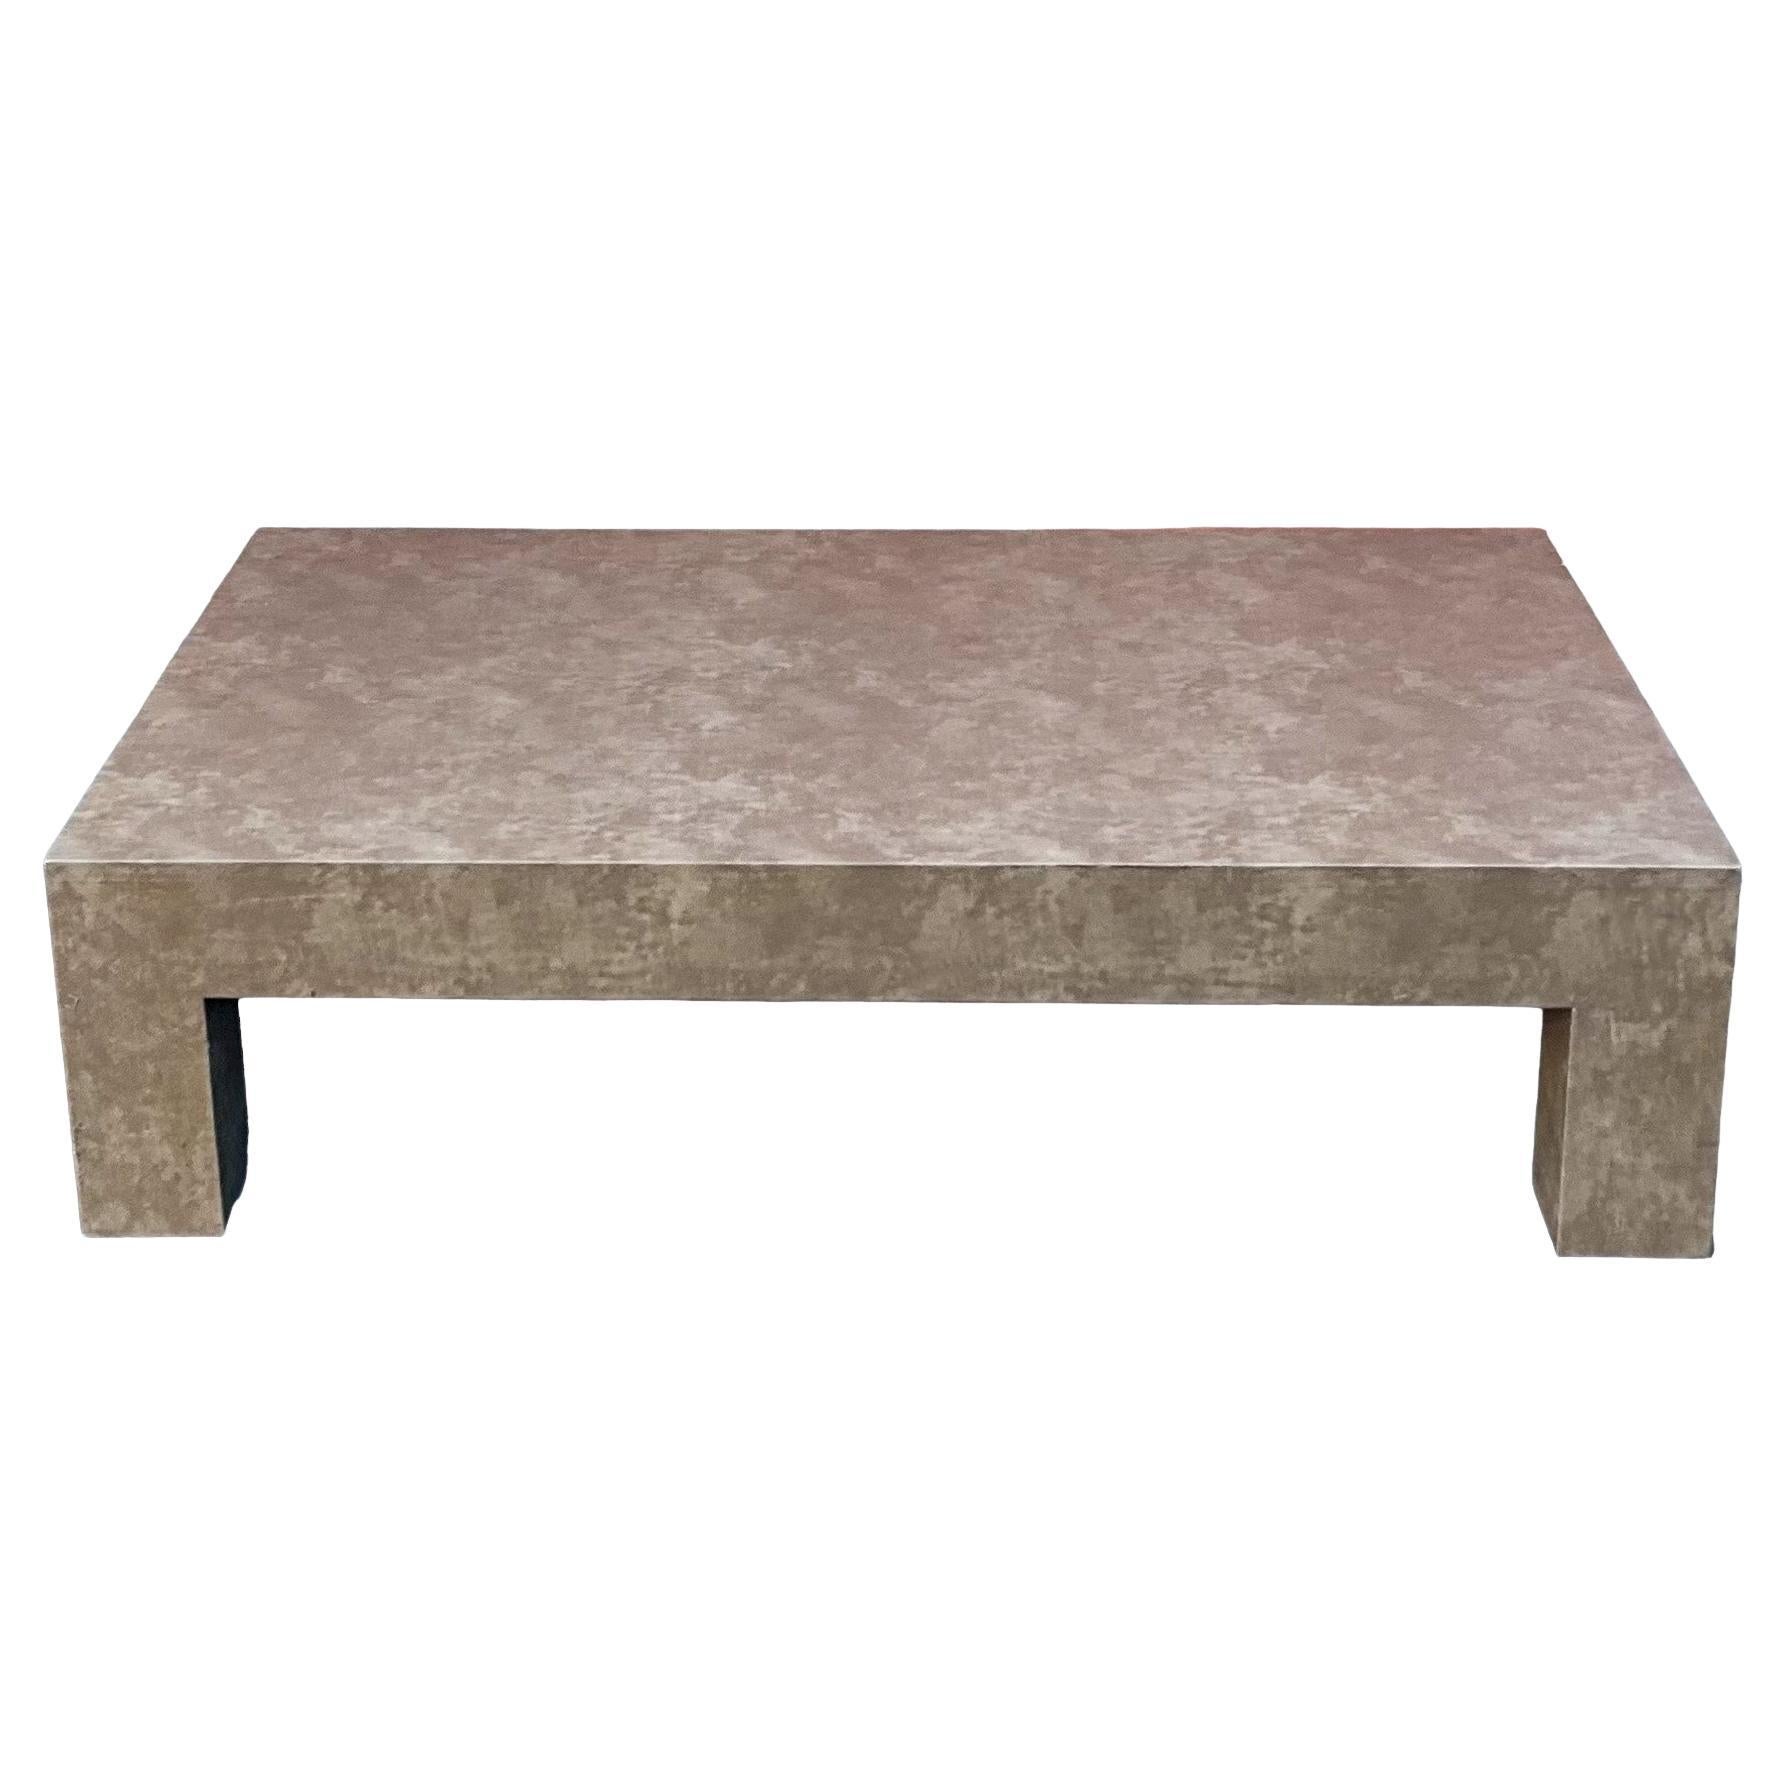 1970s Modern Parsons’ Style Low Profile Faux Snakeskin Coffee Table  For Sale